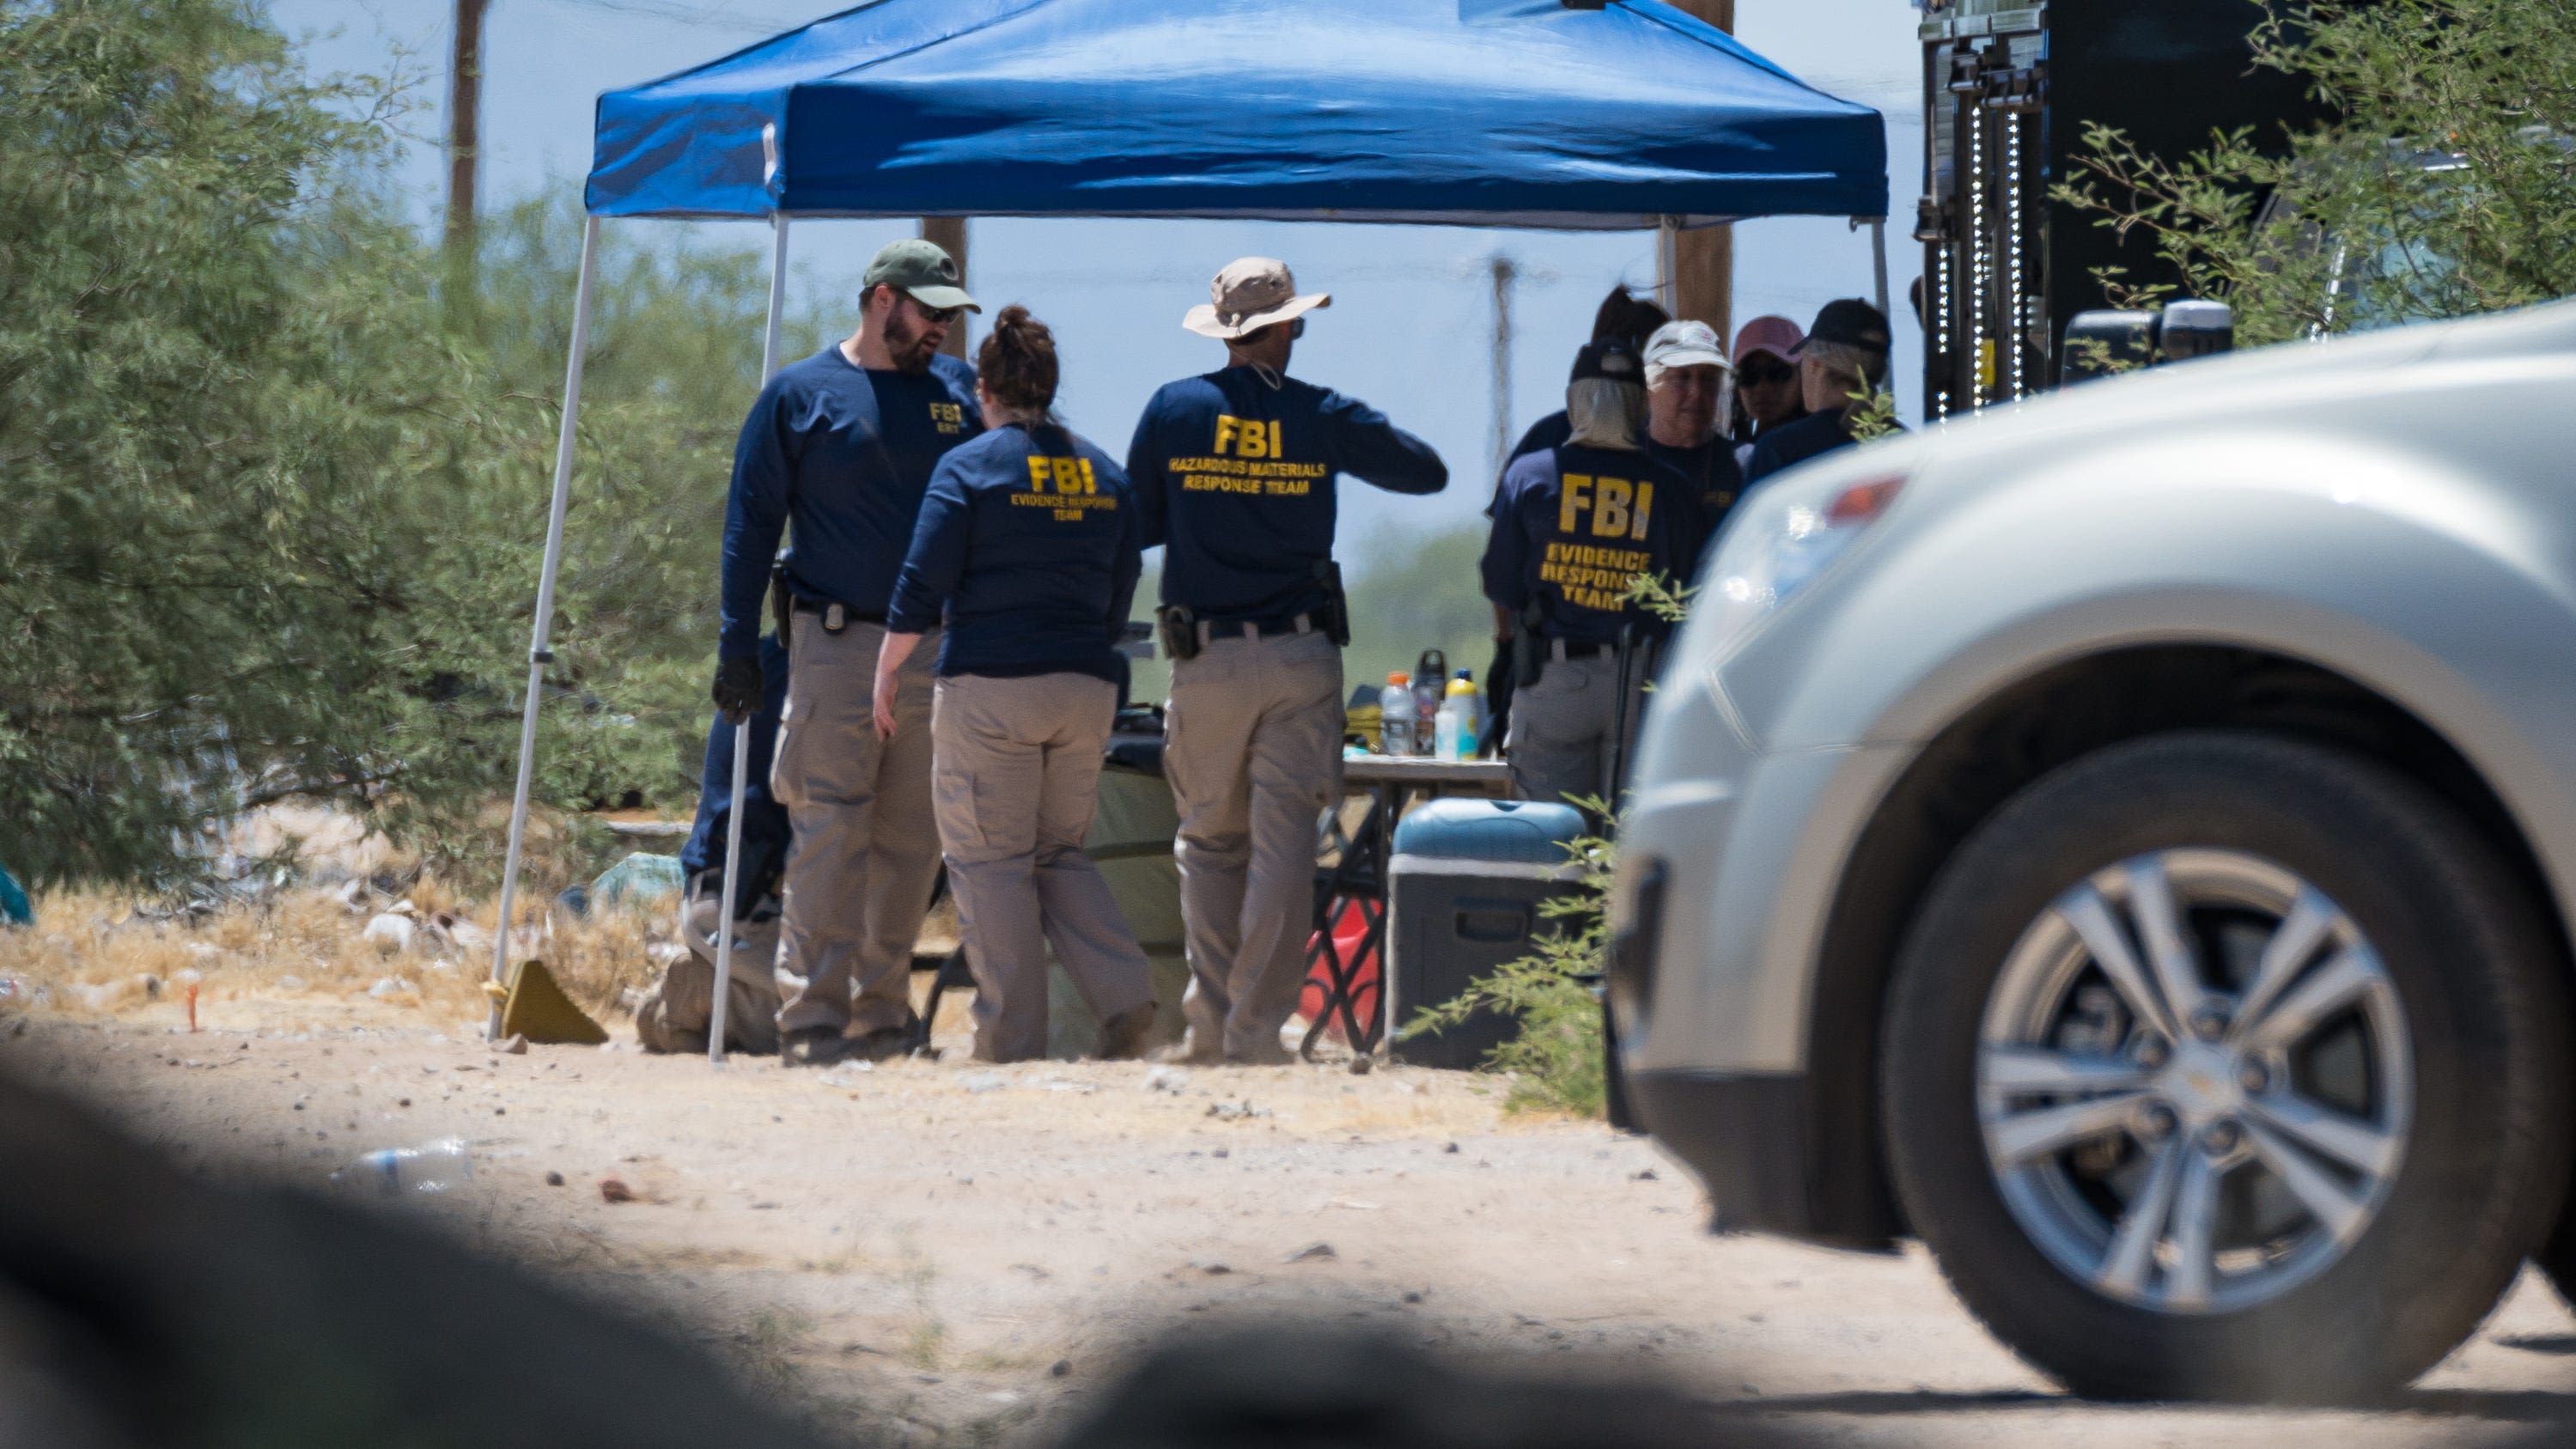 Gila River Indian Community identifies person killed in weekend shooting as 23-year-old woman